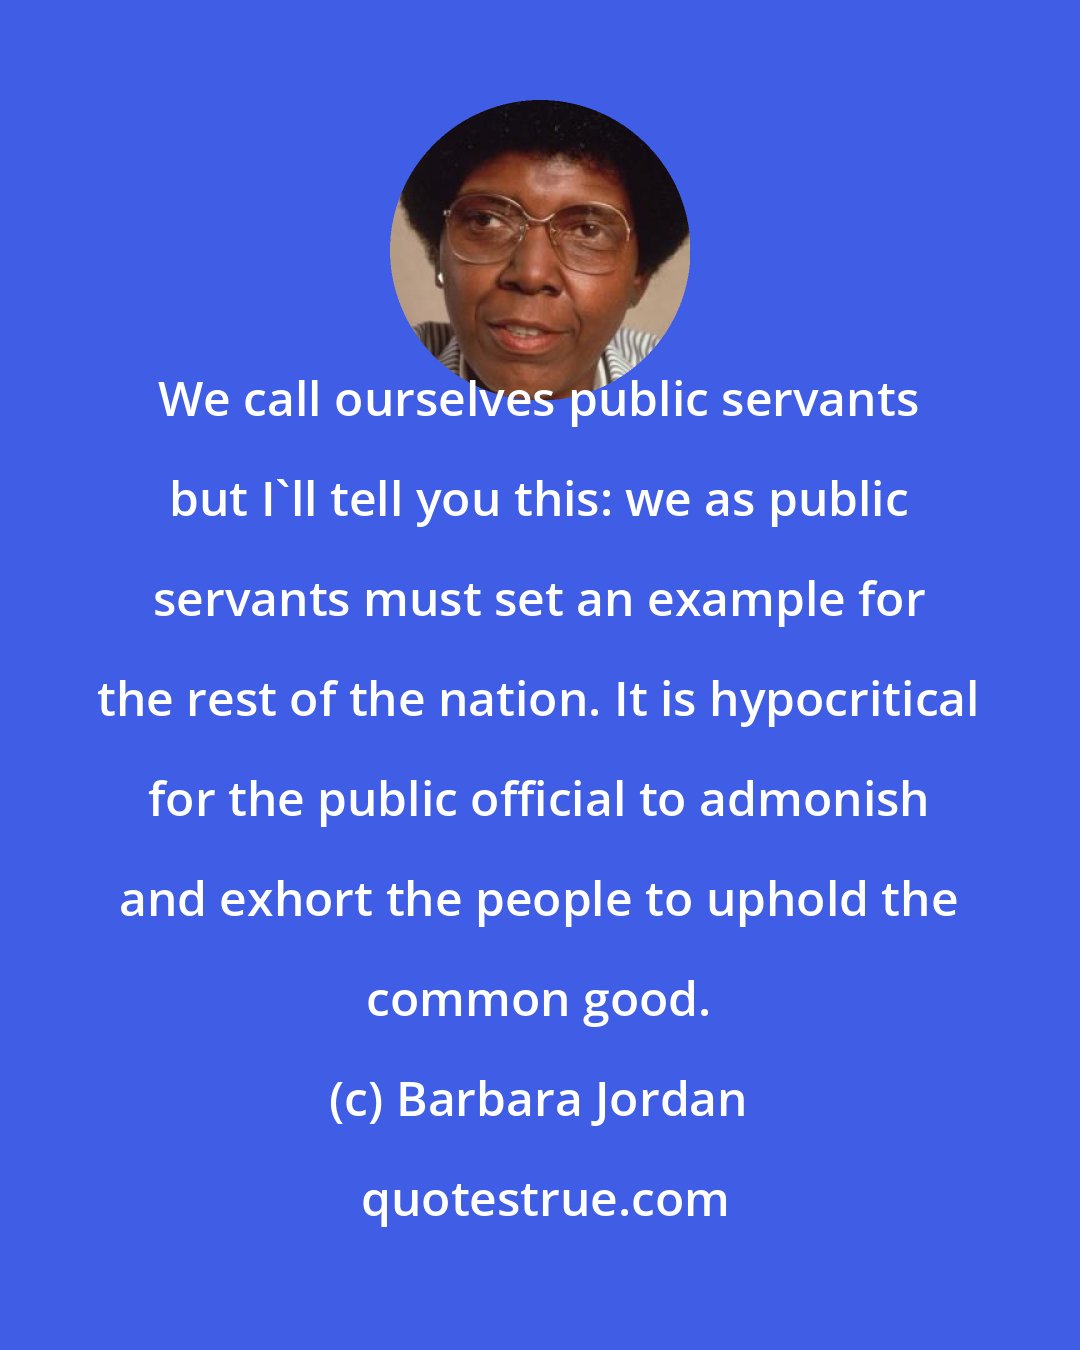 Barbara Jordan: We call ourselves public servants but I'll tell you this: we as public servants must set an example for the rest of the nation. It is hypocritical for the public official to admonish and exhort the people to uphold the common good.